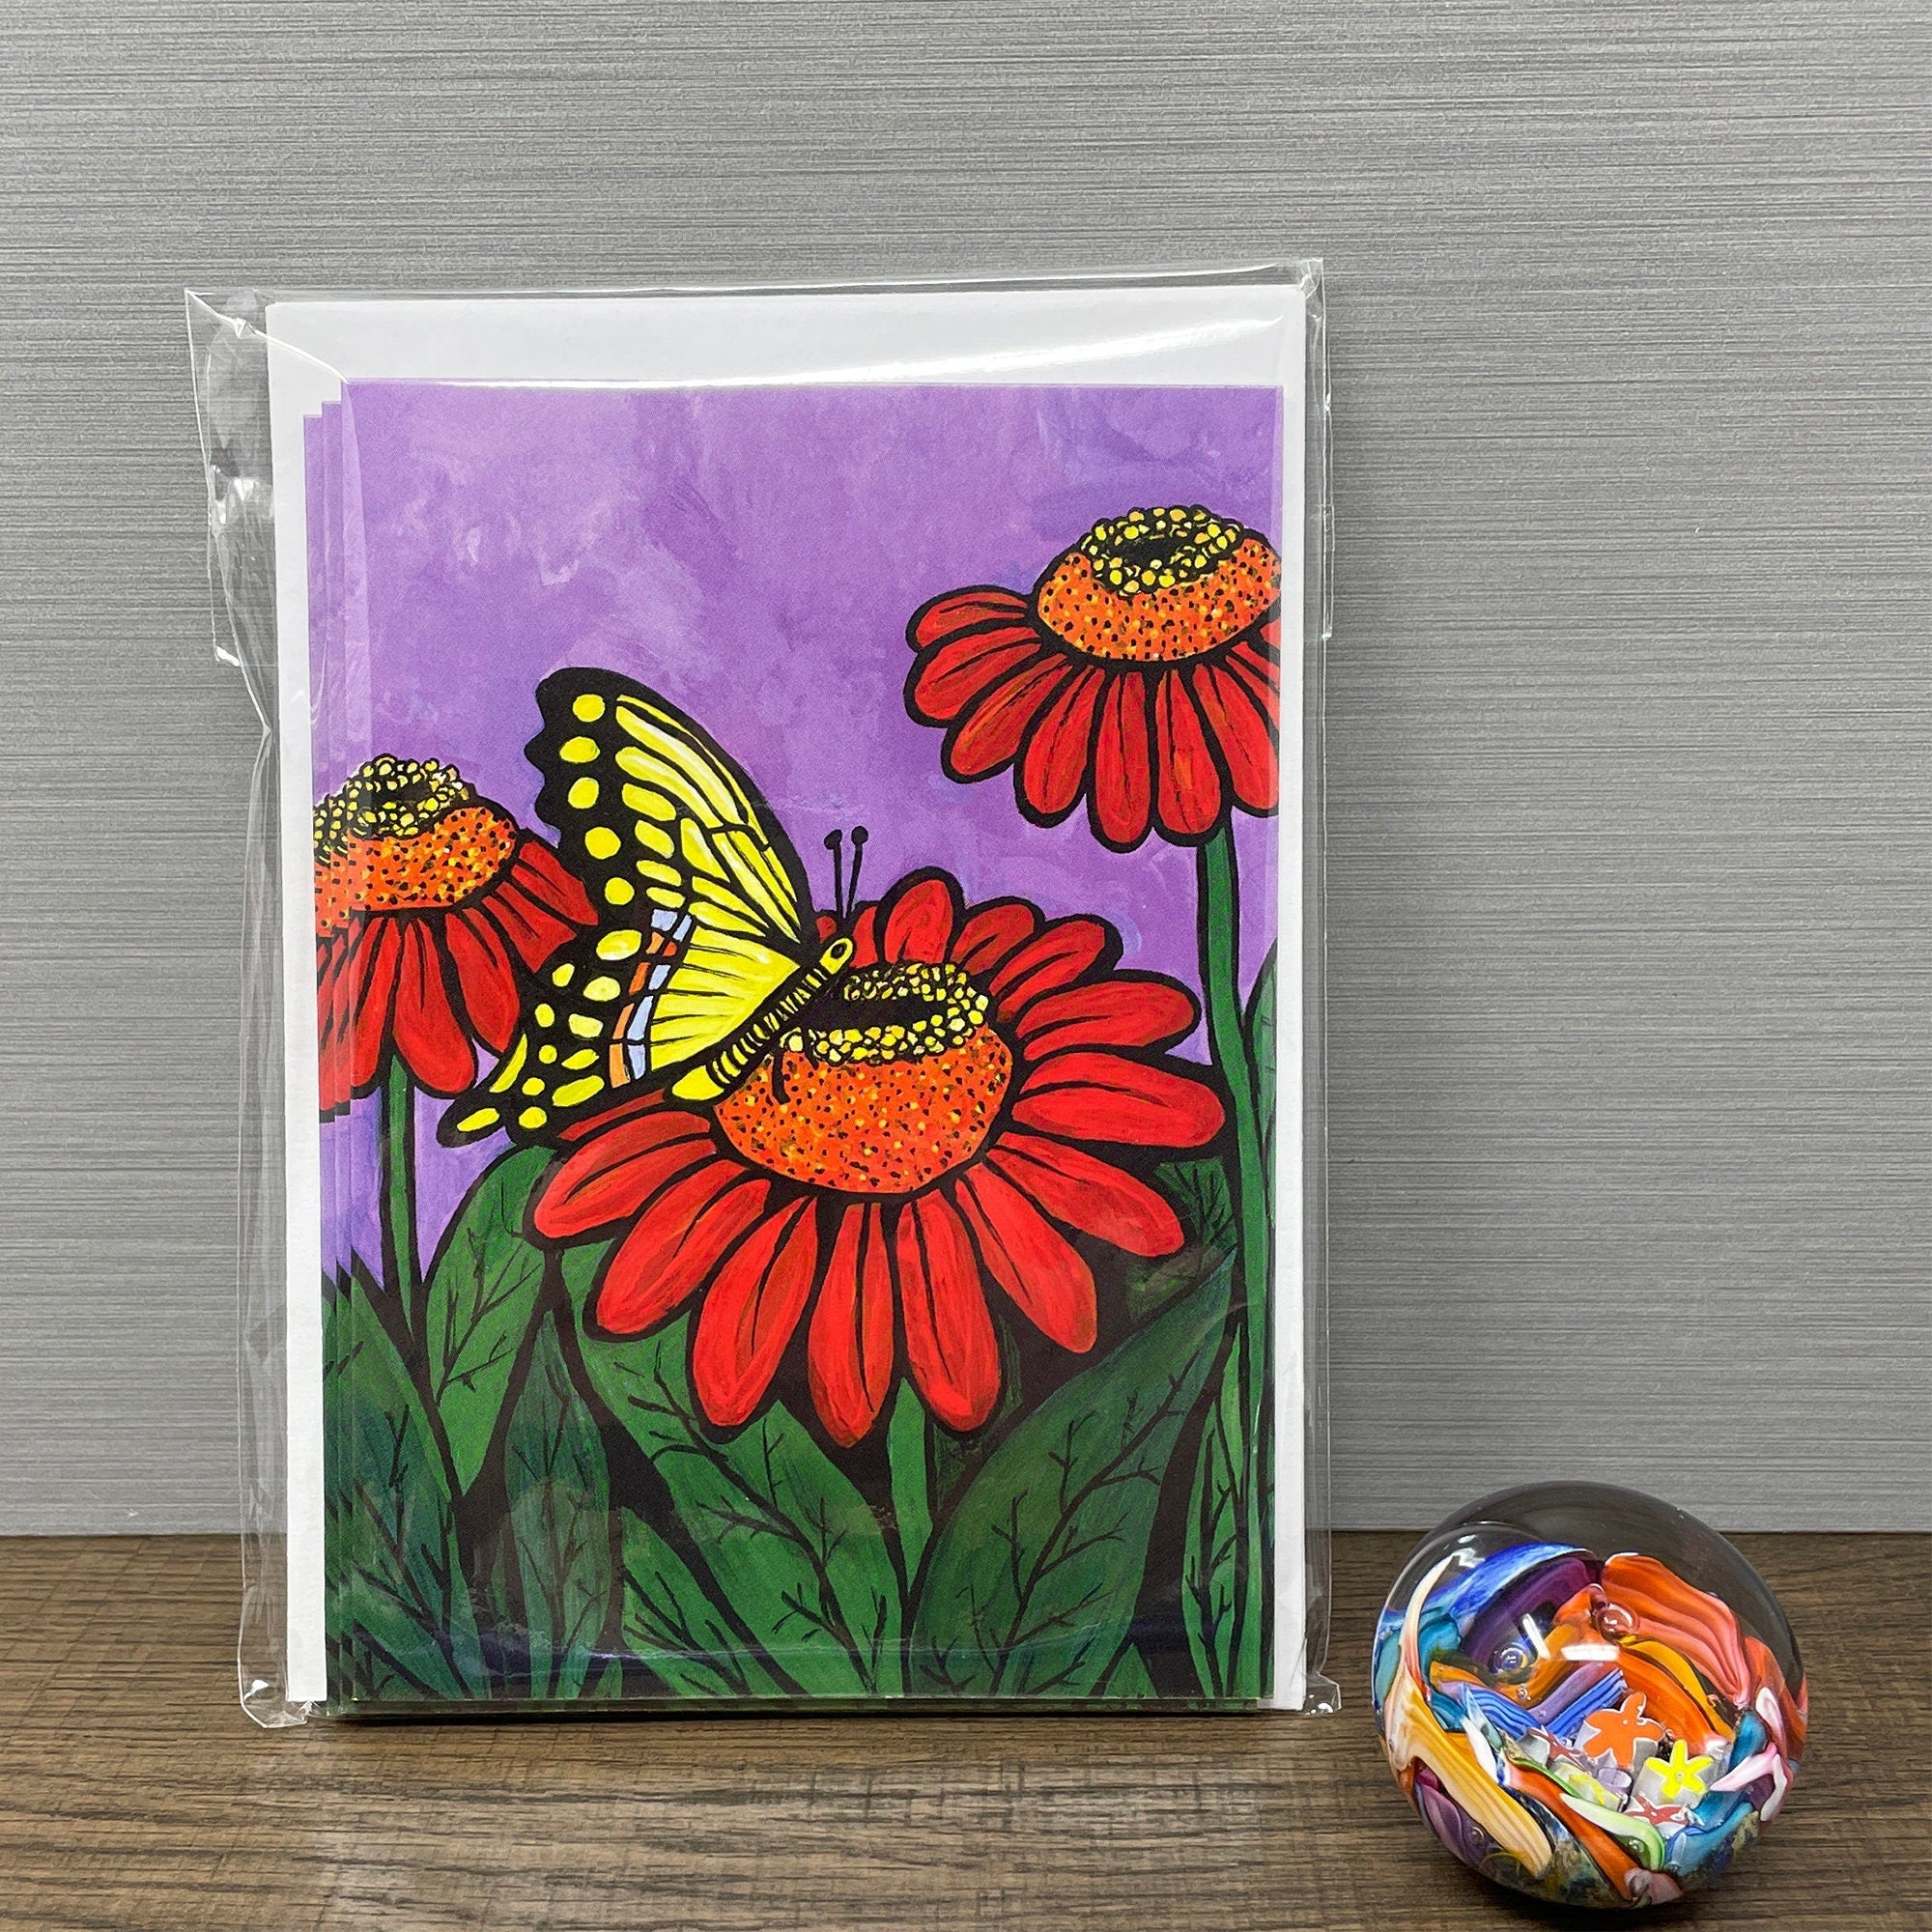 Blank Swallowtail Butterfly Cards with Envelopes Set - NoteCards with Butterfly and Zinnias for Thank You, Birthday, Wedding, Any Occasion